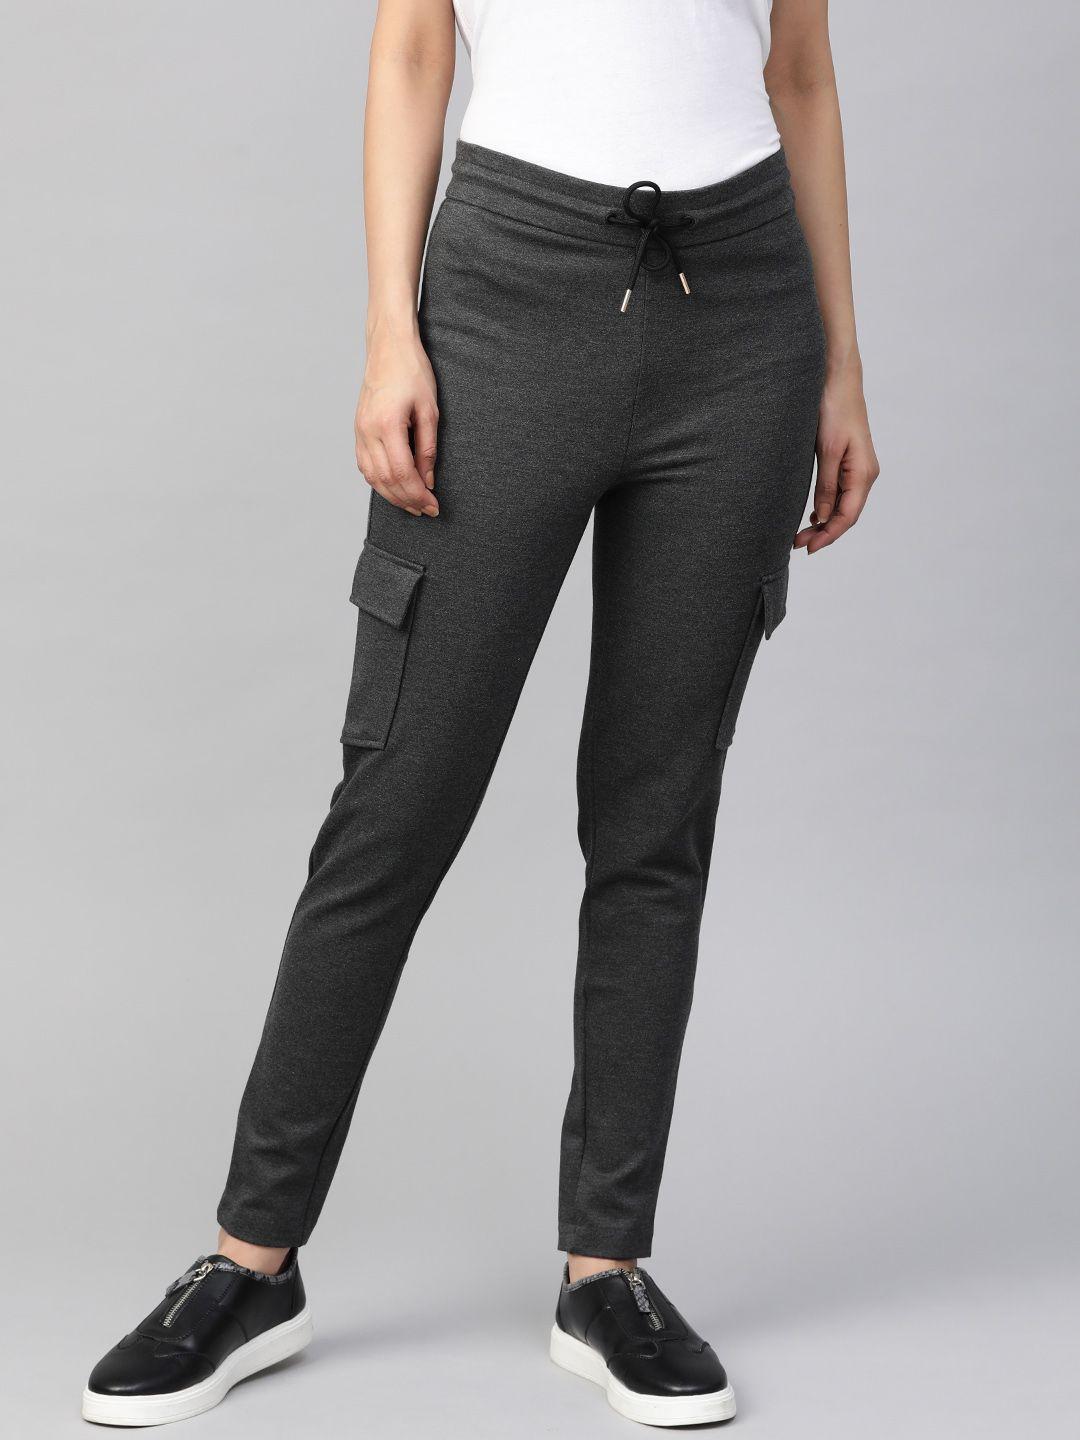 marks & spencer women charcoal grey solid straight fit track pants